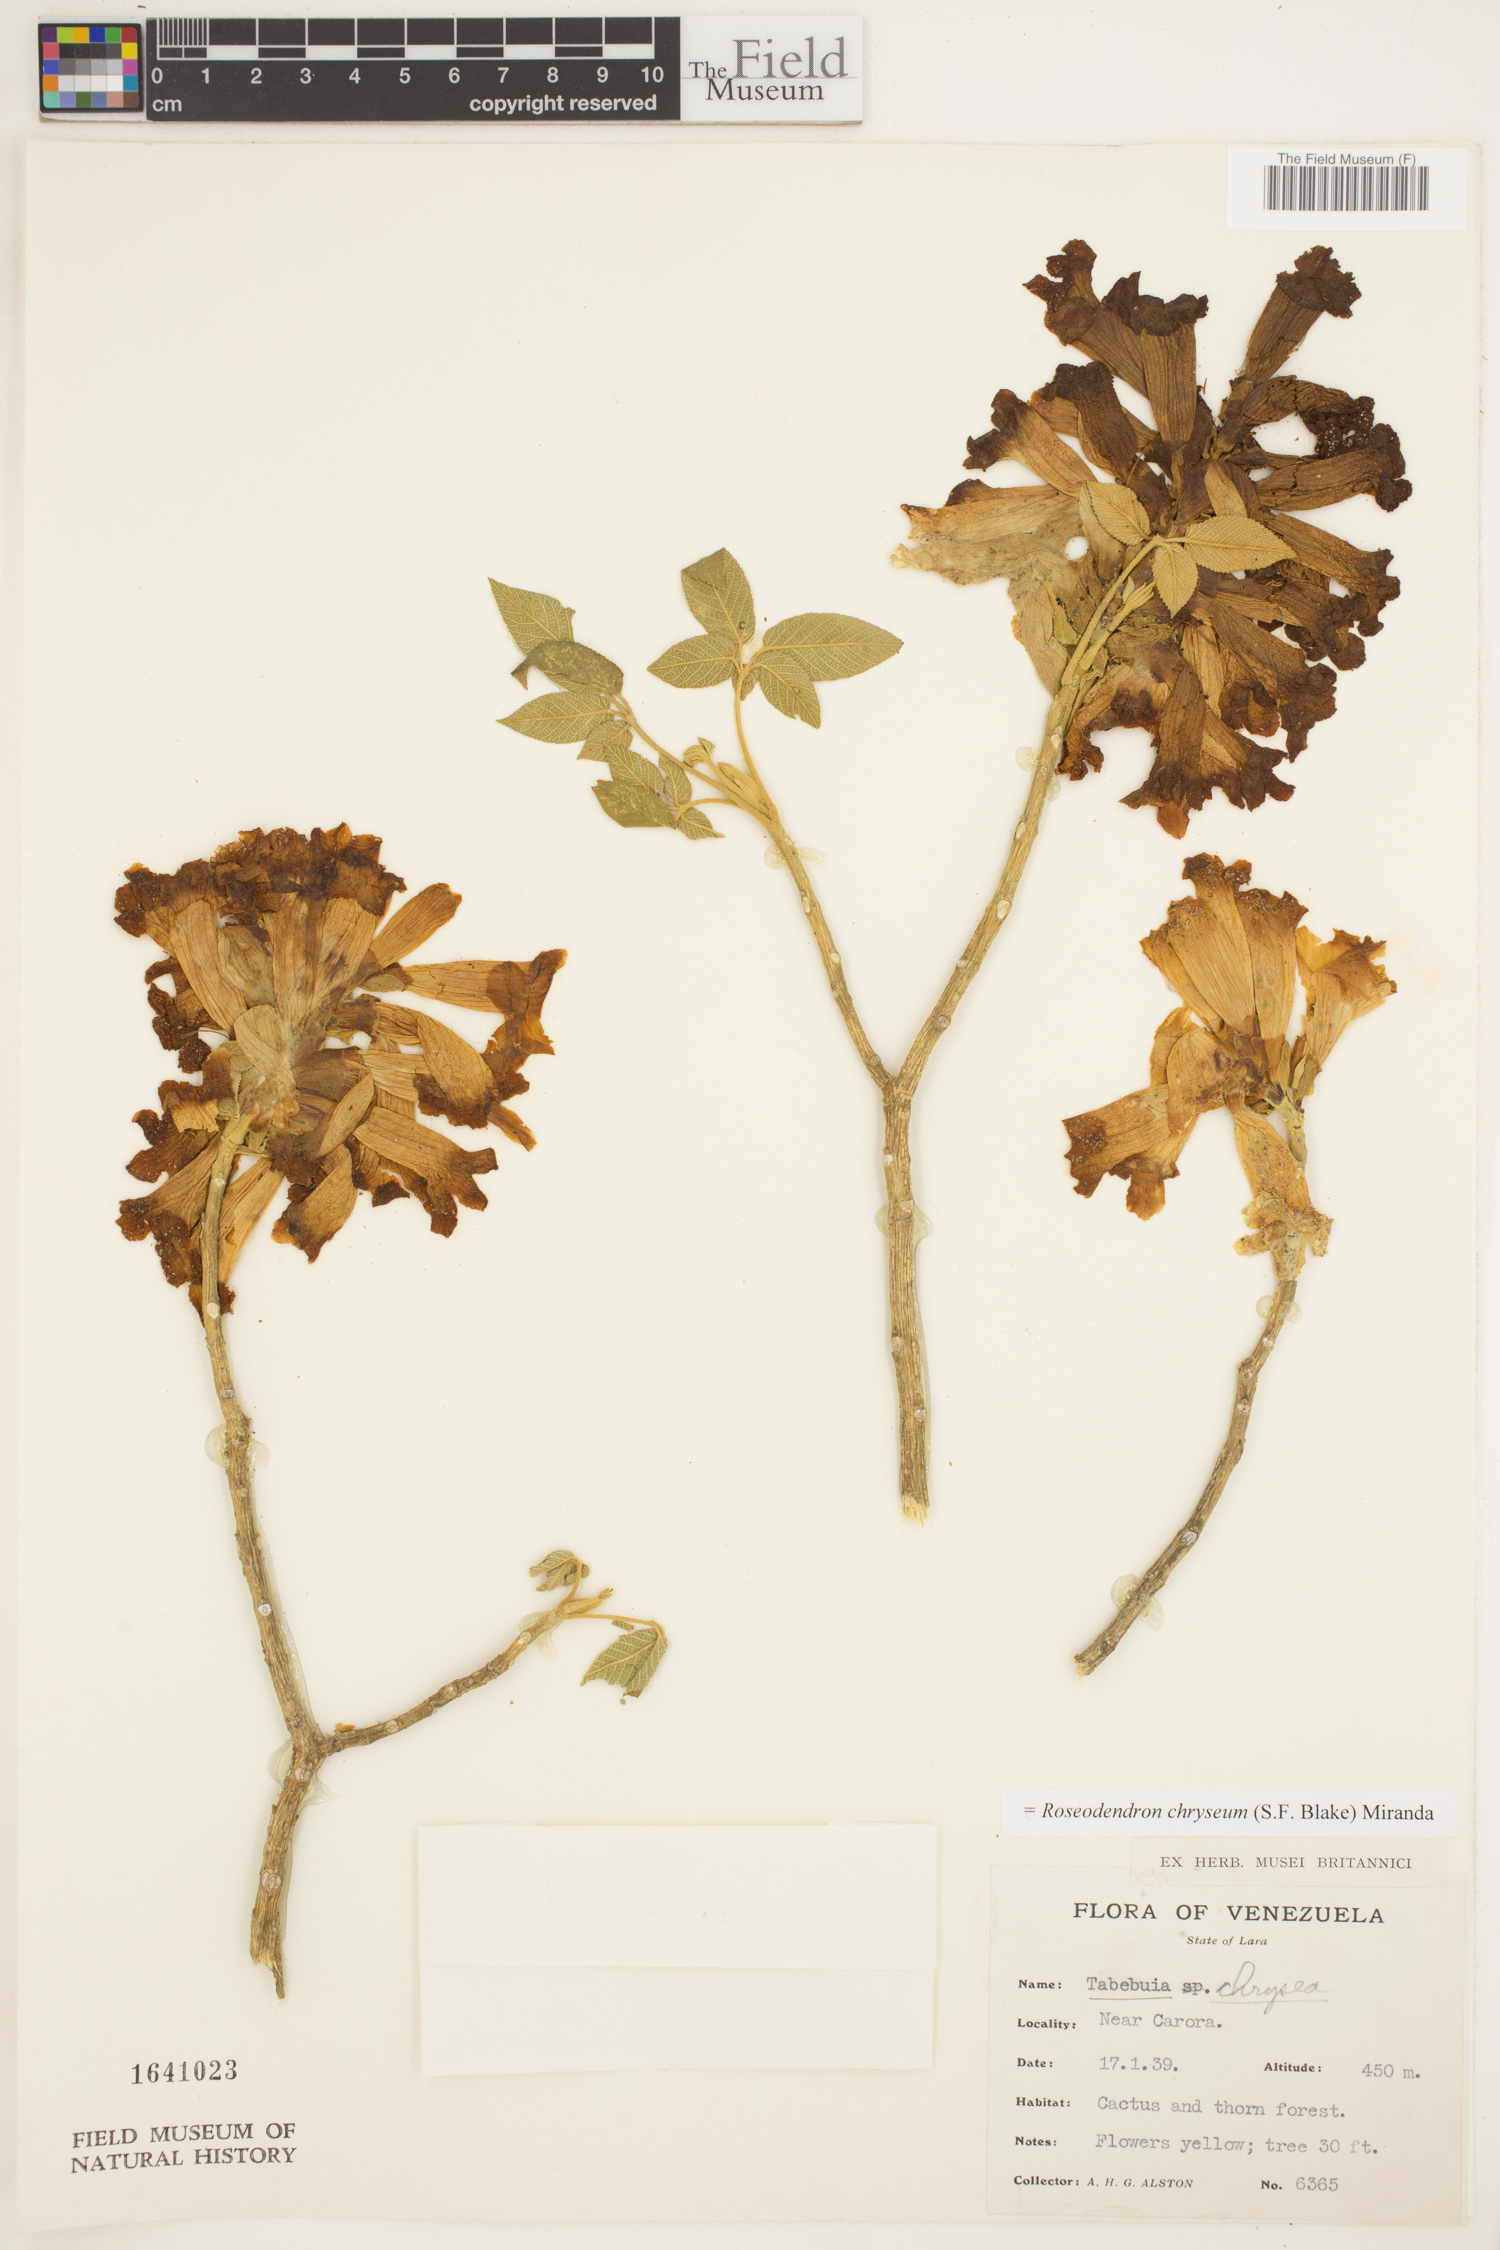 Roseodendron chryseum image